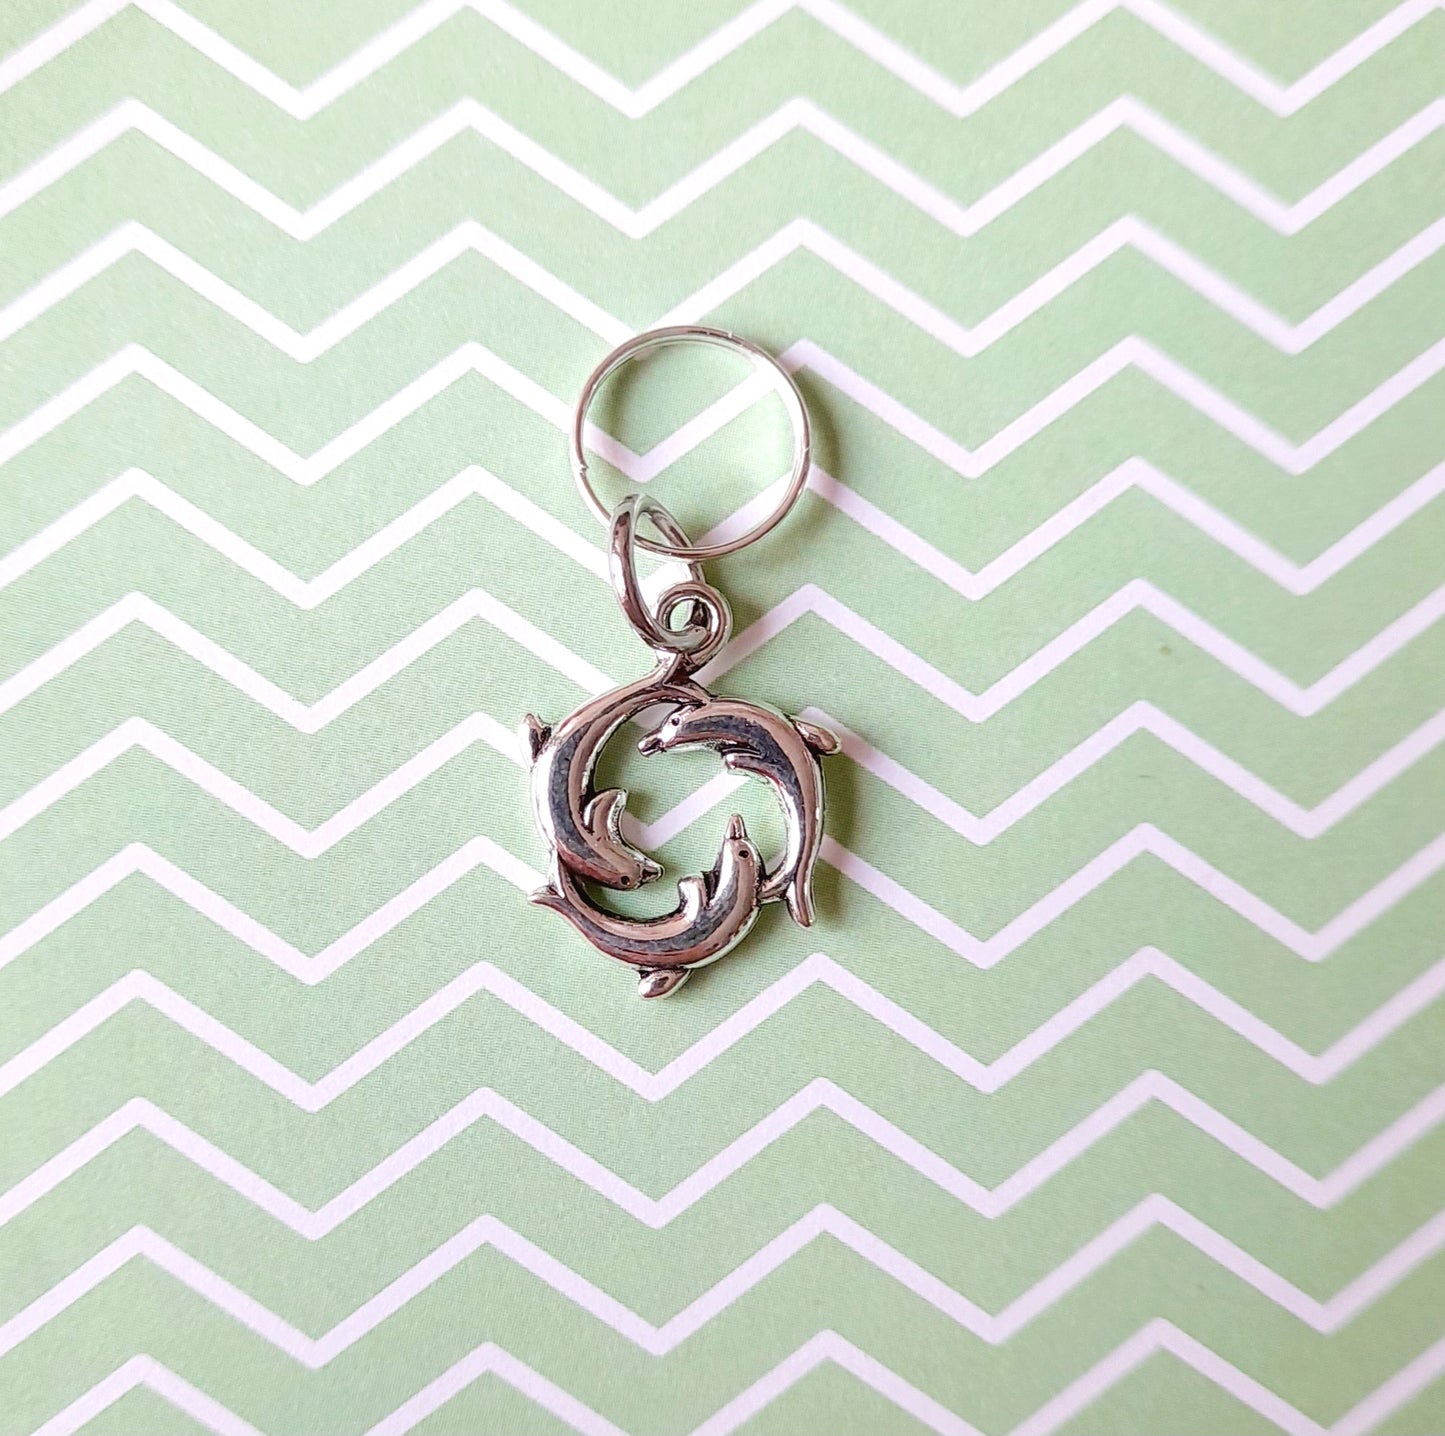 Dolphin stitch marker. Locking crochet stitch marker with fixed ring. 